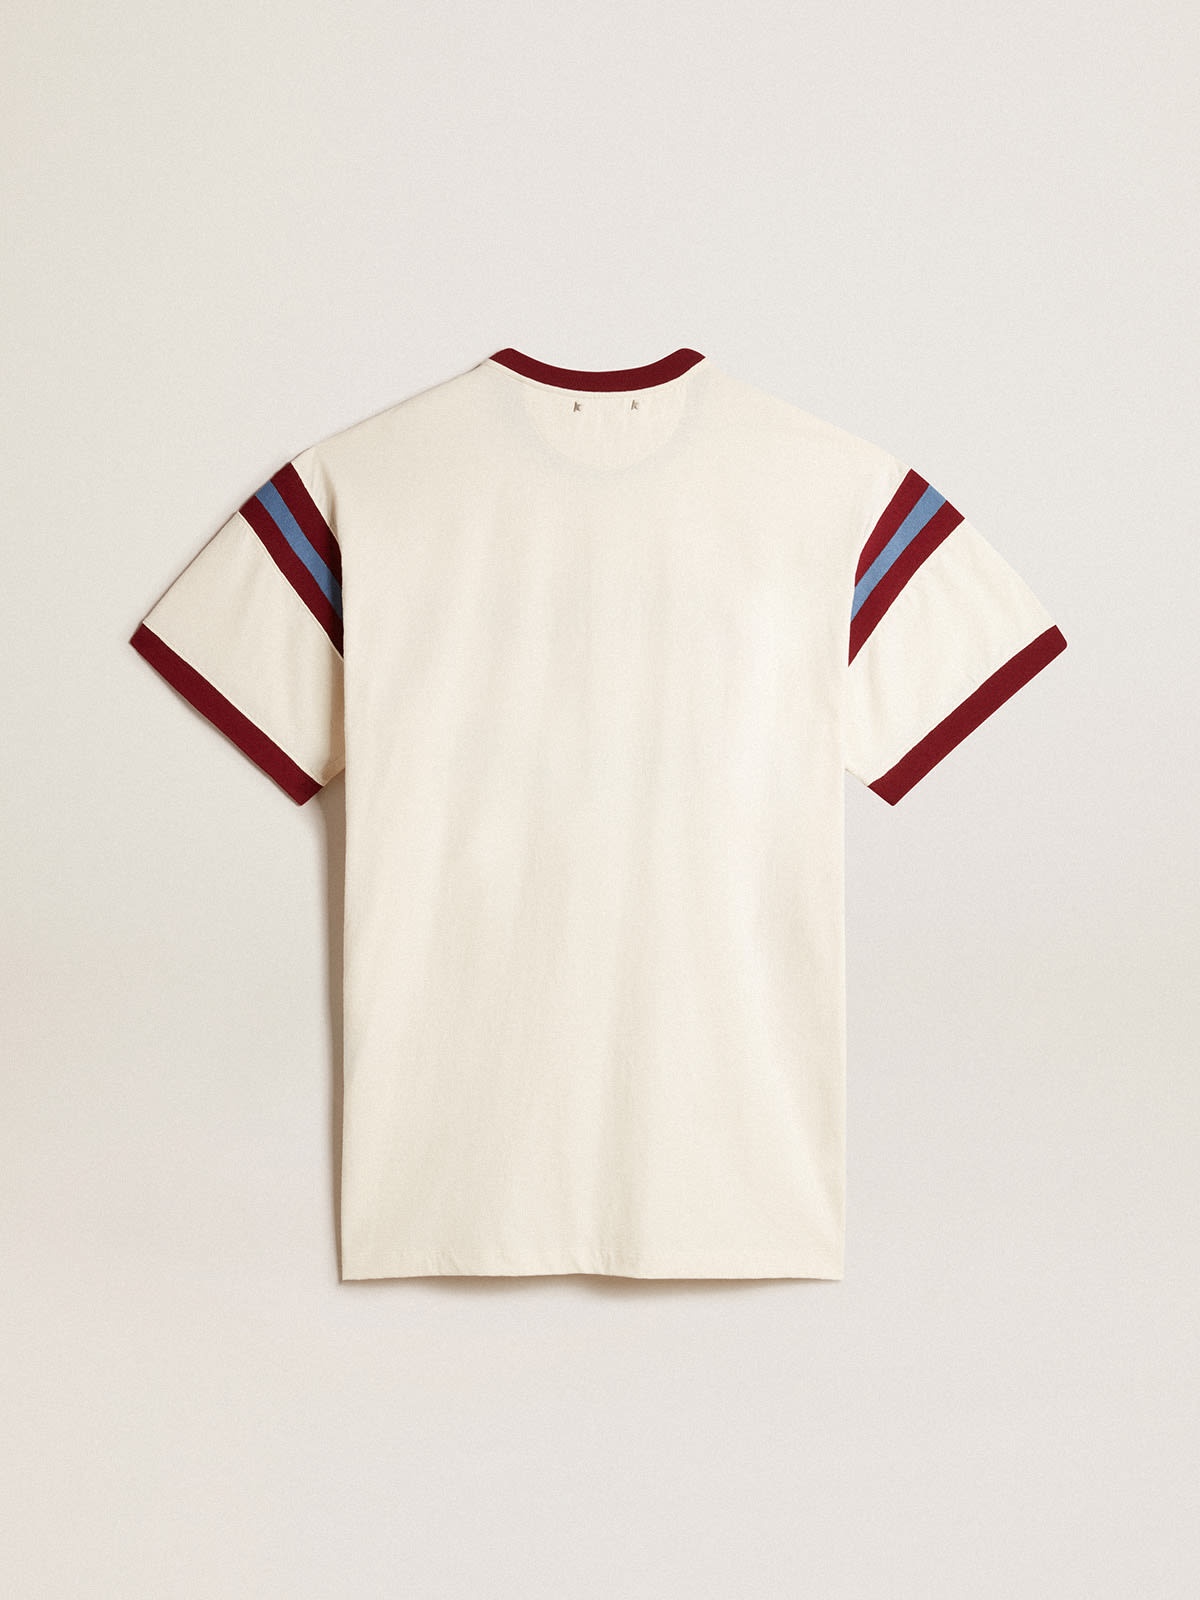 Women’s white dress with burgundy lettering on the front - 5